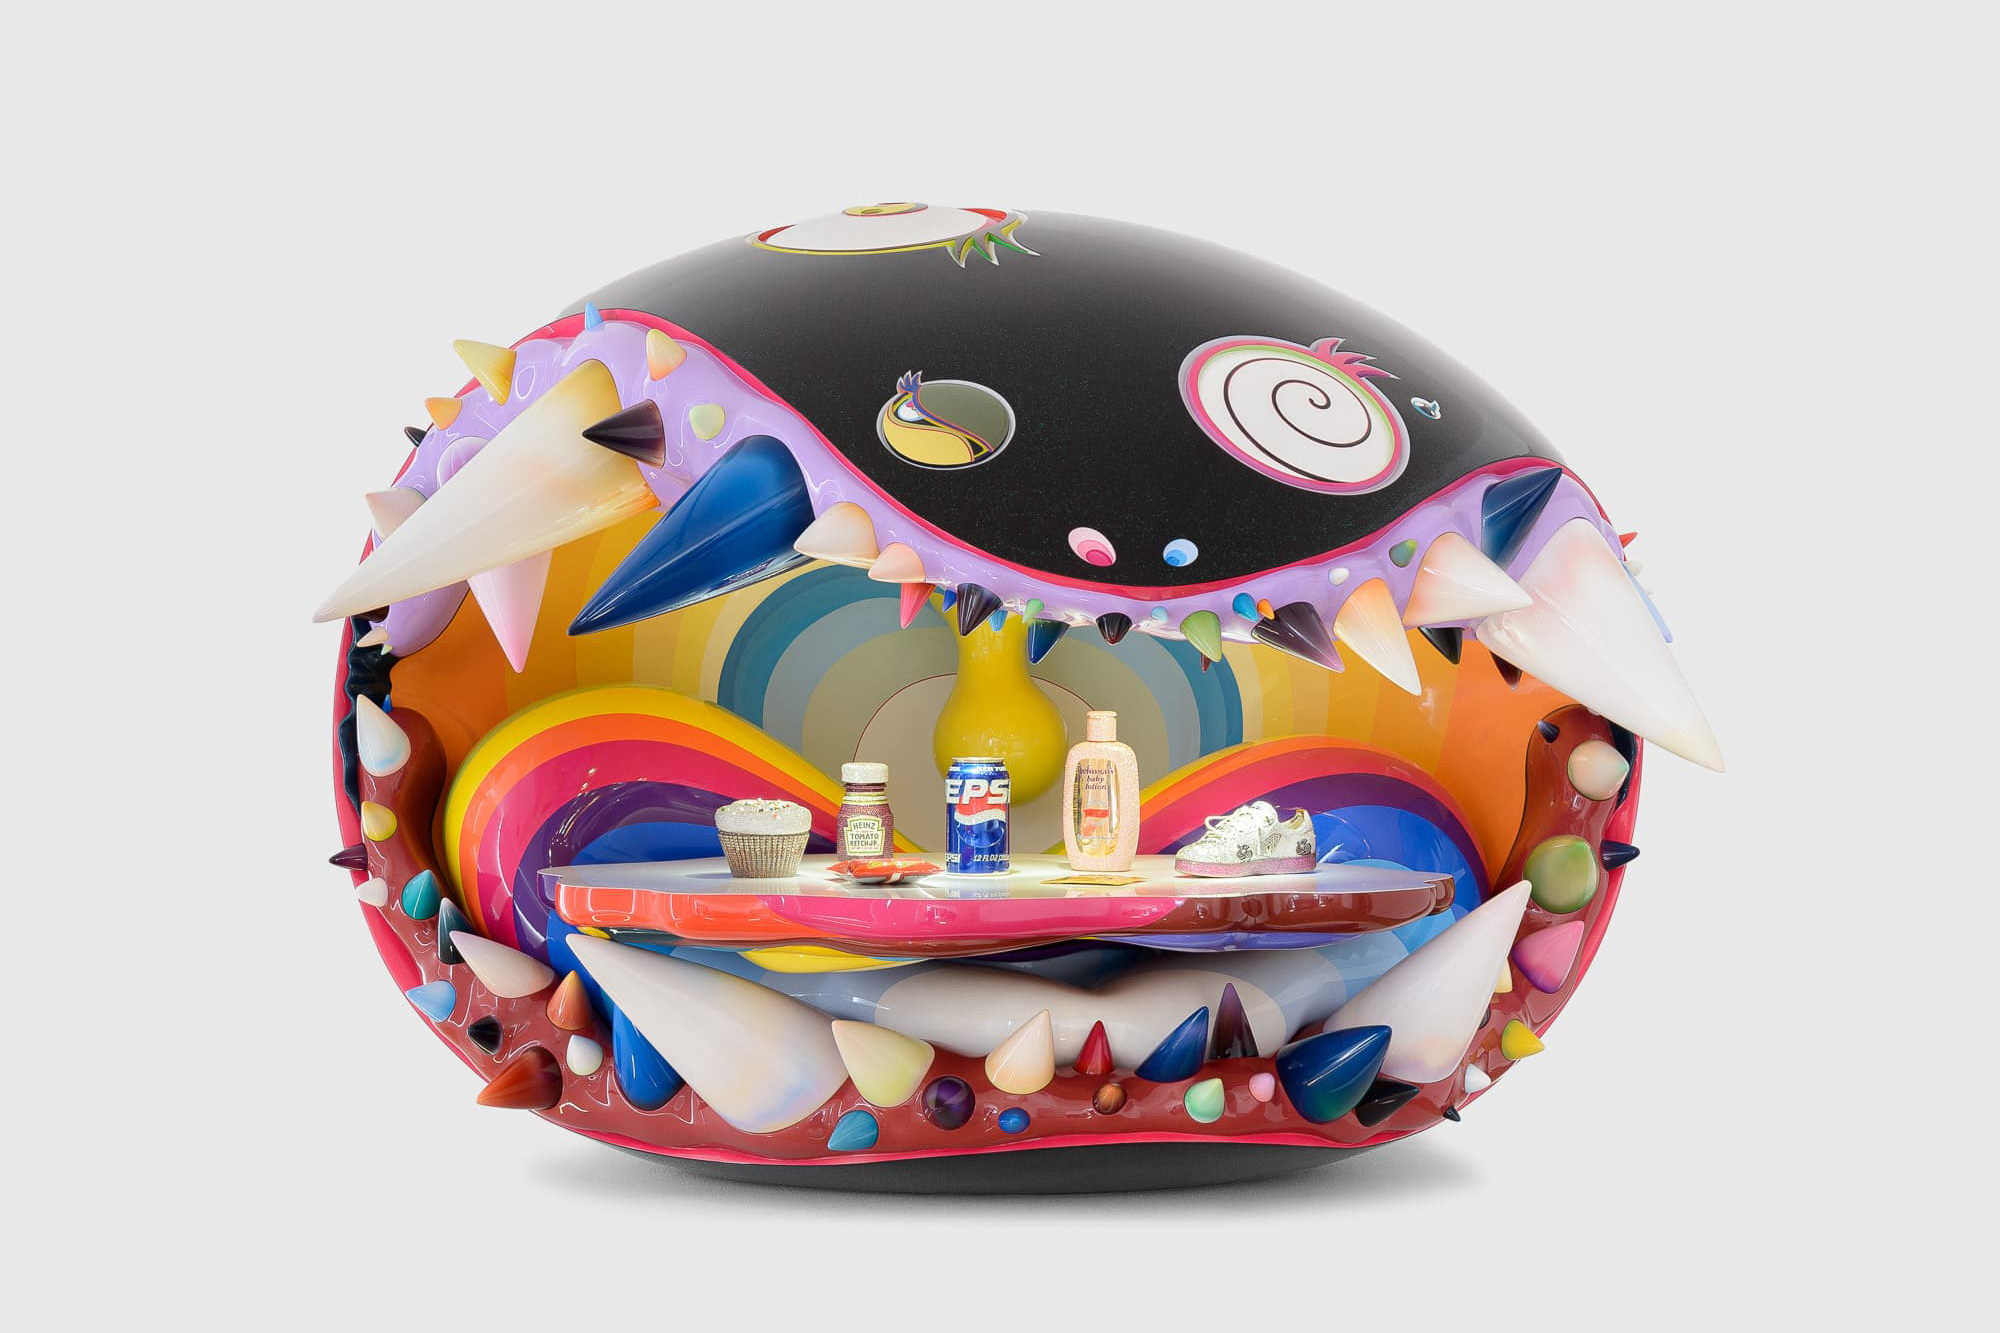 Lewis Hamilton and Takashi Murakami Link Up for a Limited-Edition Capsule